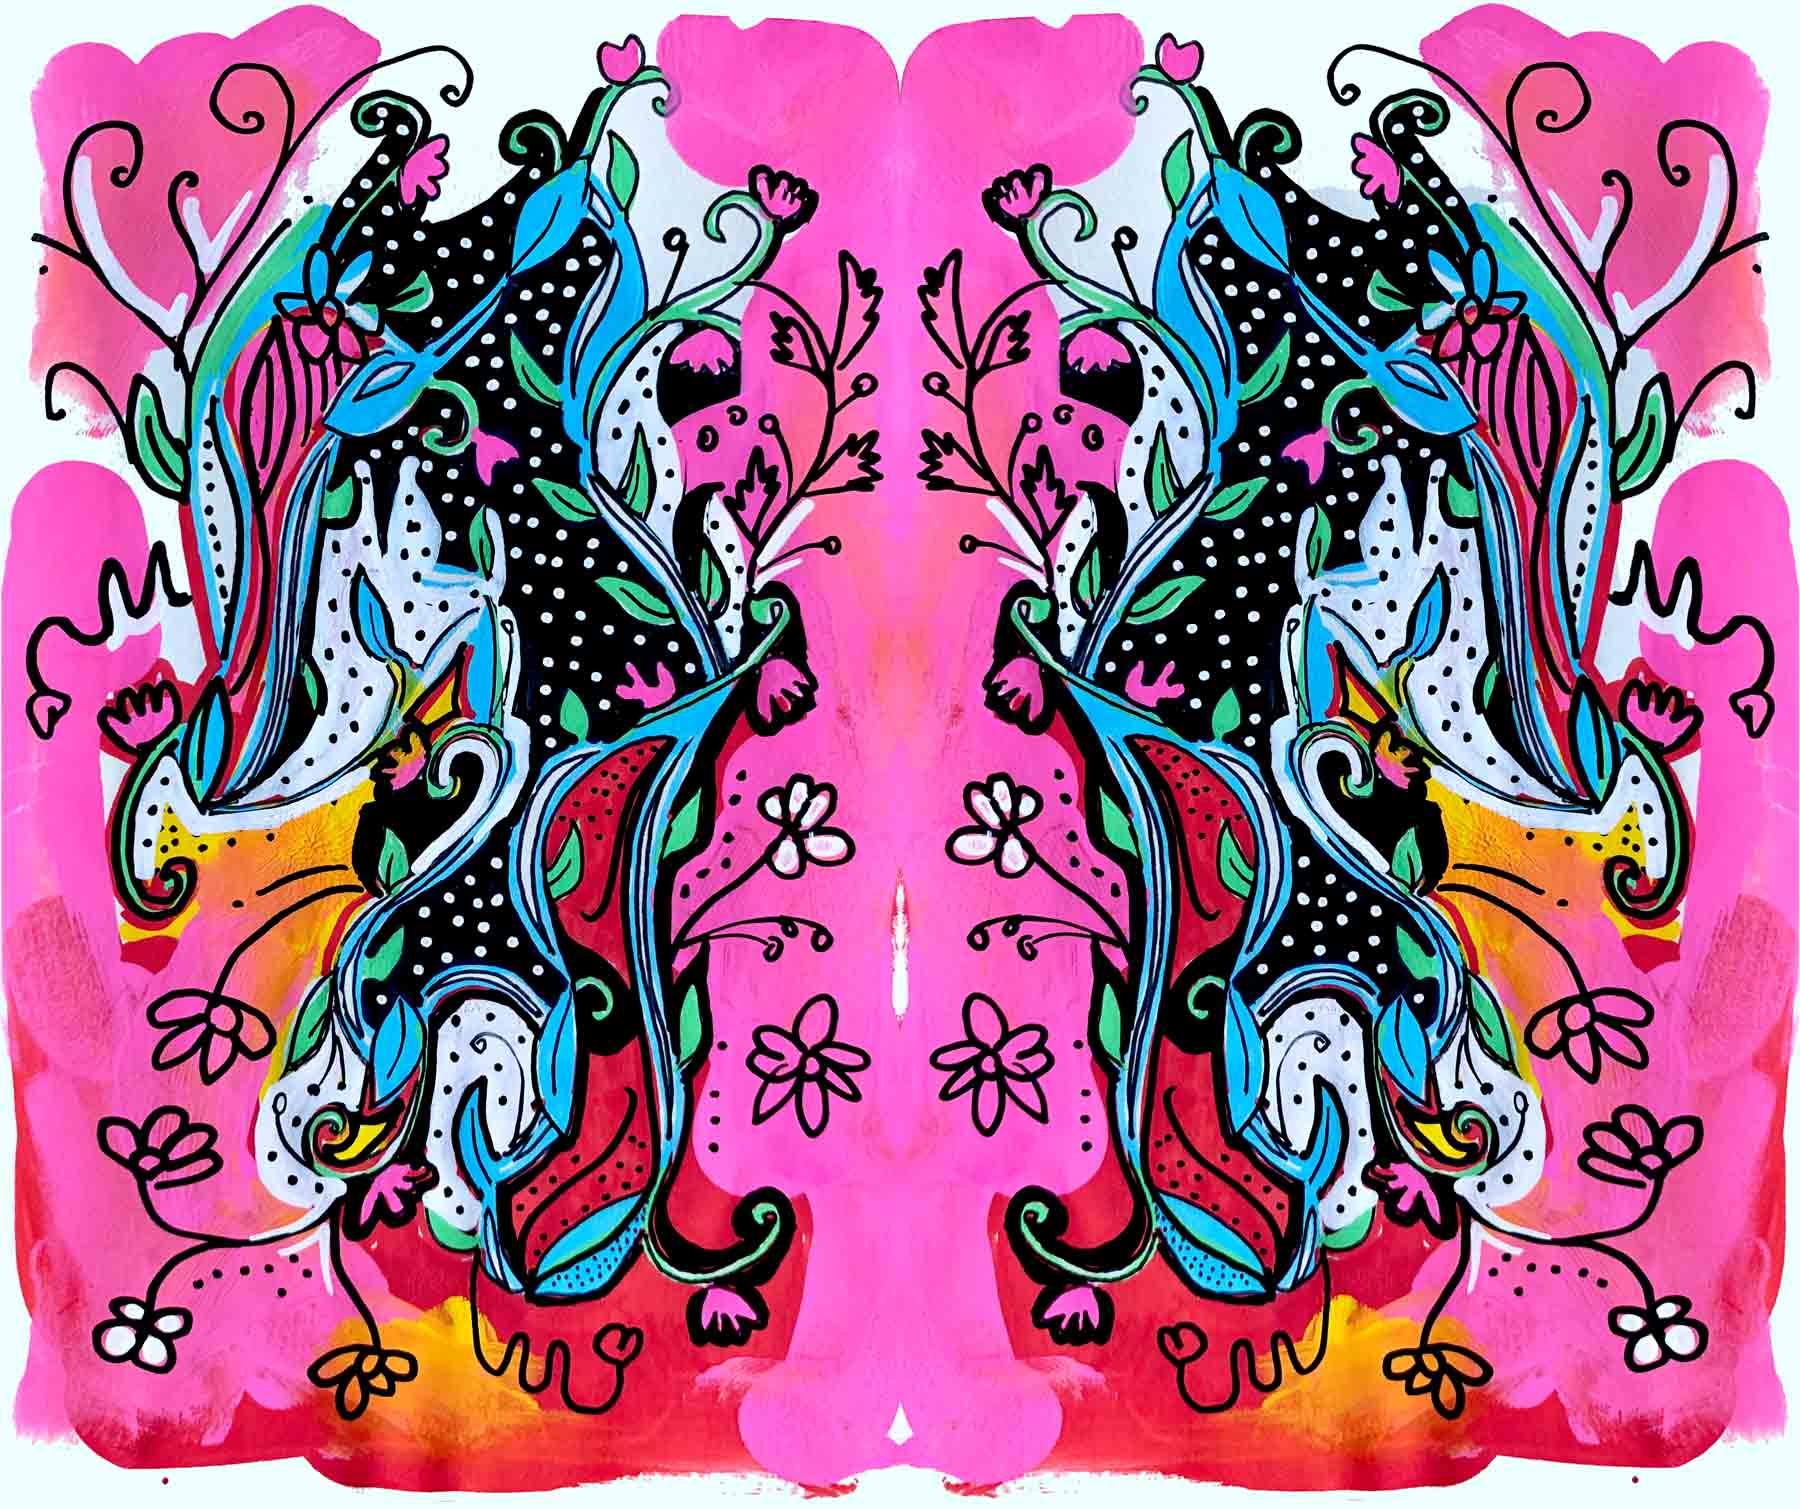 art every day number 649 / paint, pen, digital / posca pink double